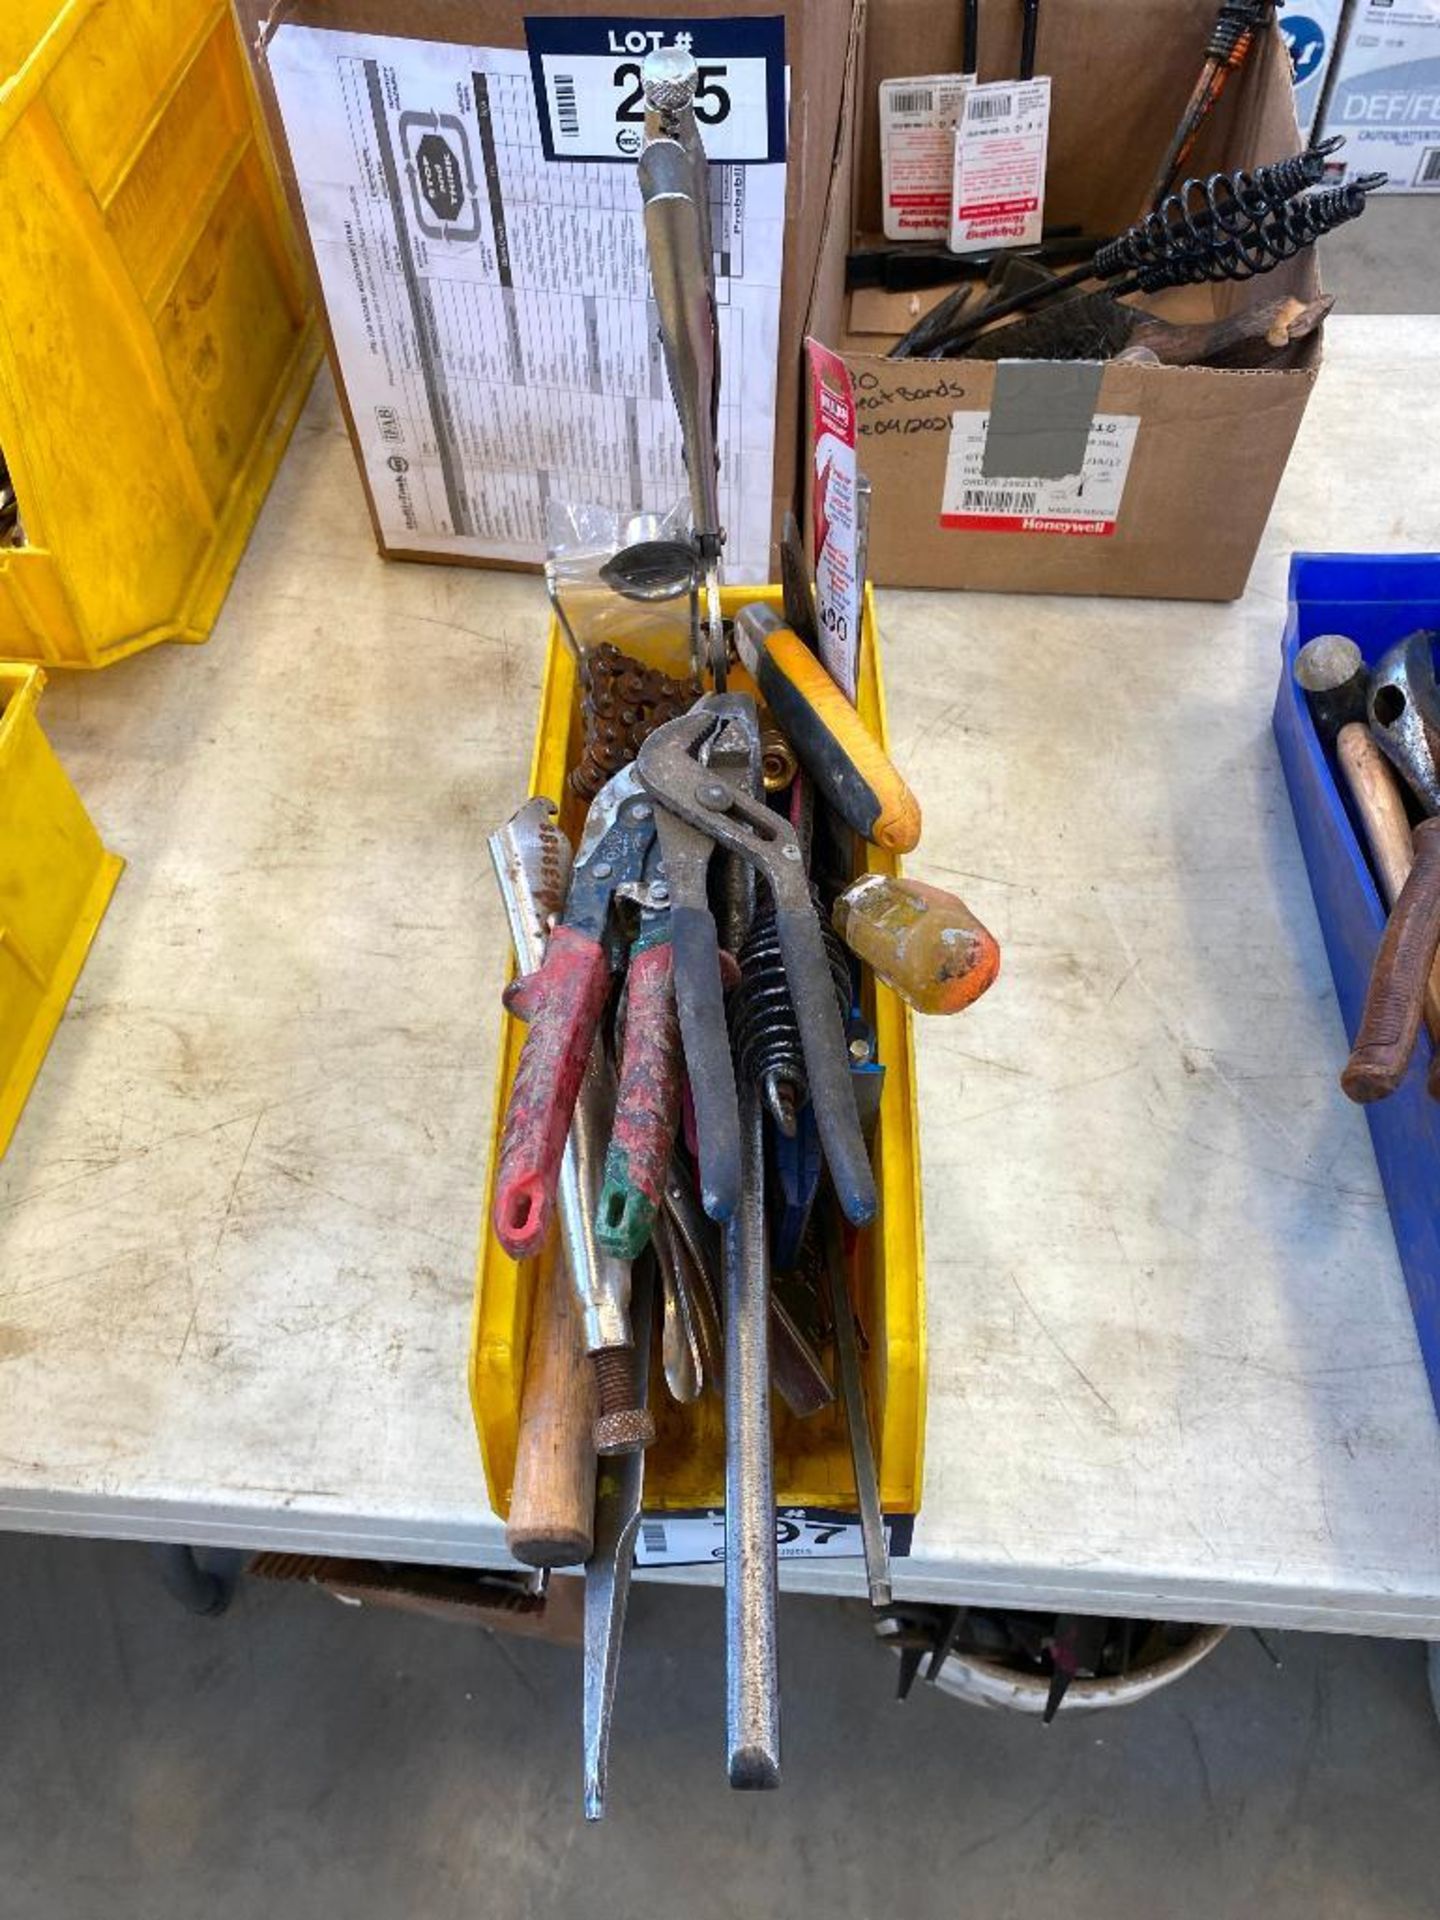 Lot of Asst. Files, Pliers, Vise Grips, etc. - Image 2 of 3